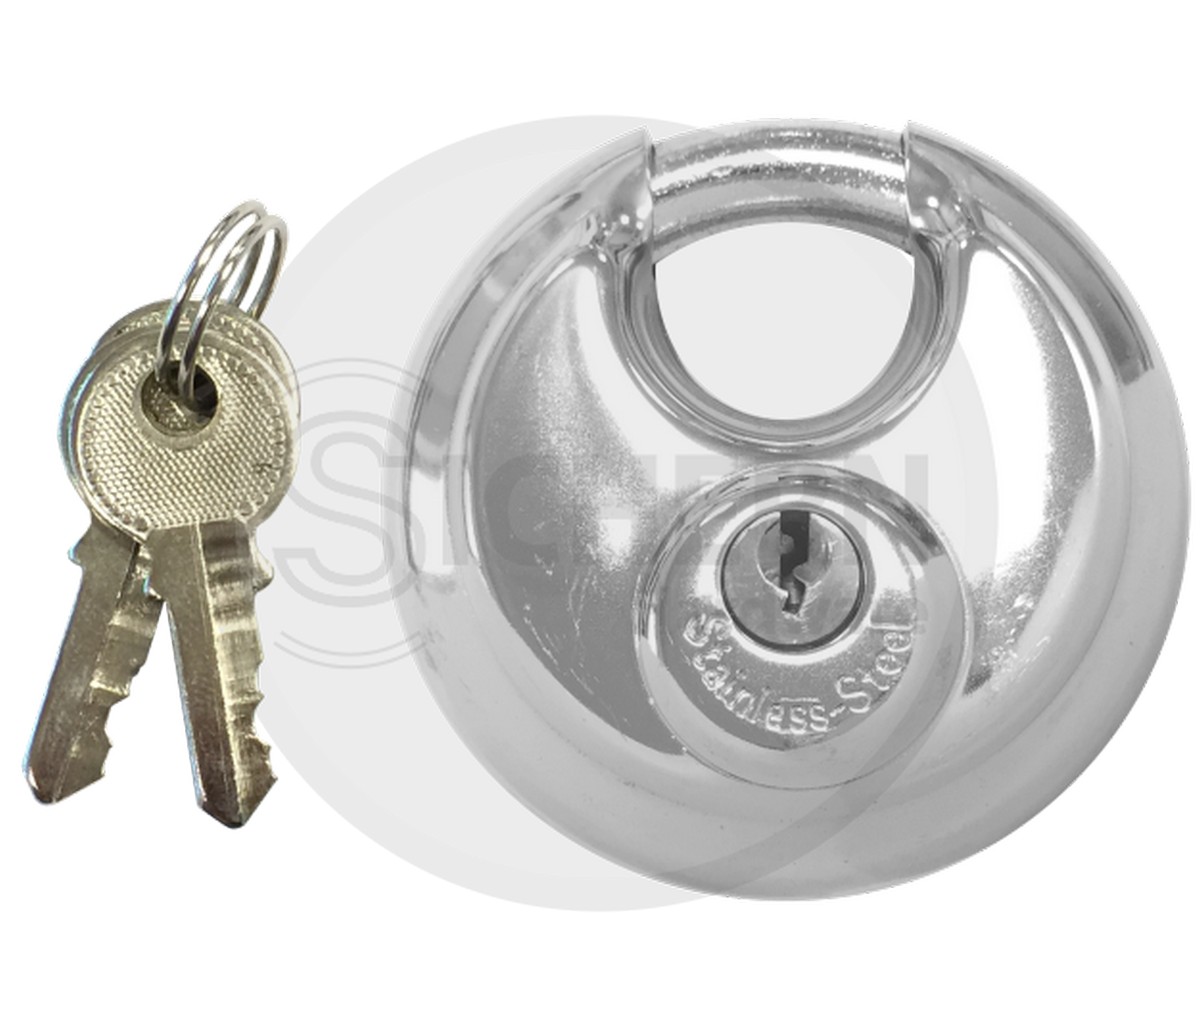 Stainless Steel Discus Padlock 70MM - Polished